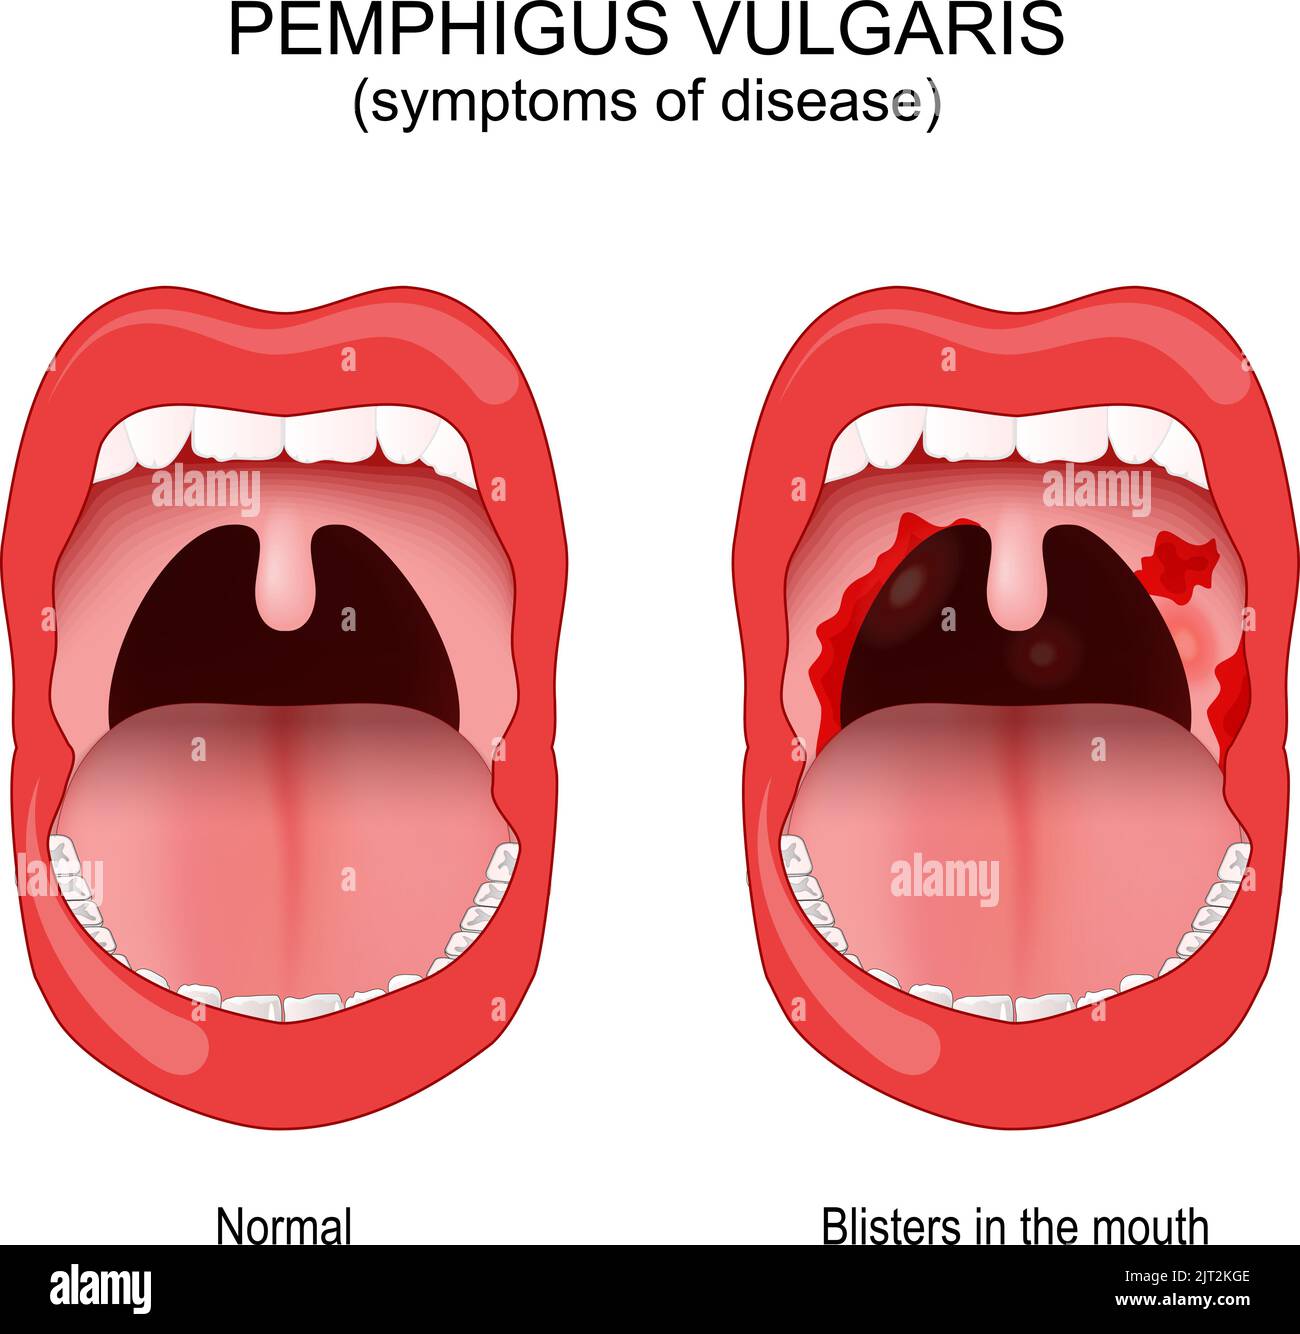 Pemphigus vulgaris. problem with the immune system. person wit affected area inside the mouth and throat blisters. Early symptoms of disease. vector i Stock Vector